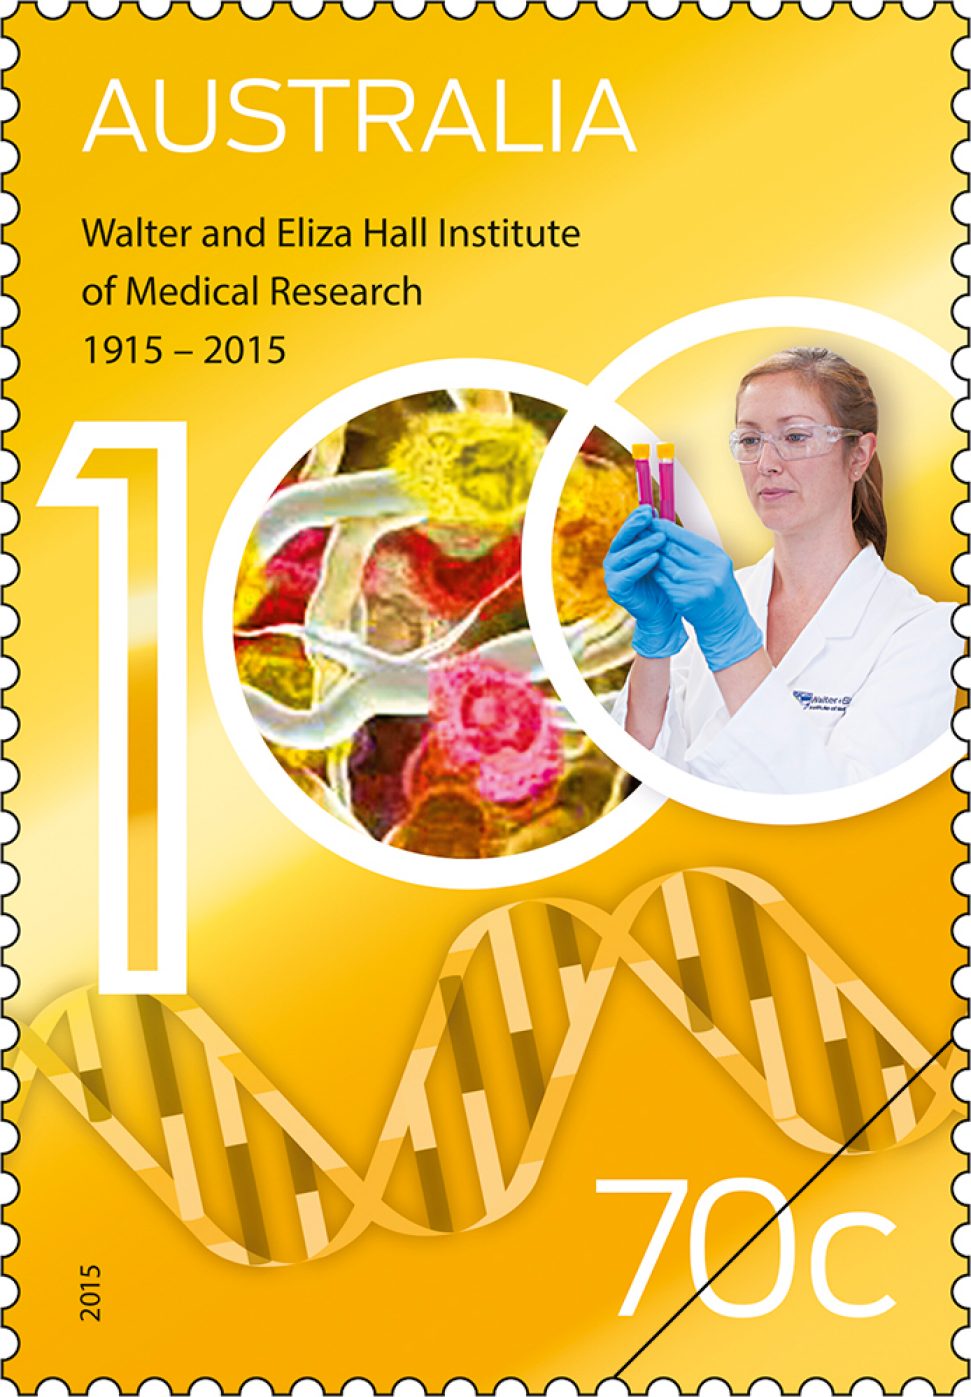 Centenary of the Walter and Eliza Hall Institute of Medical Research